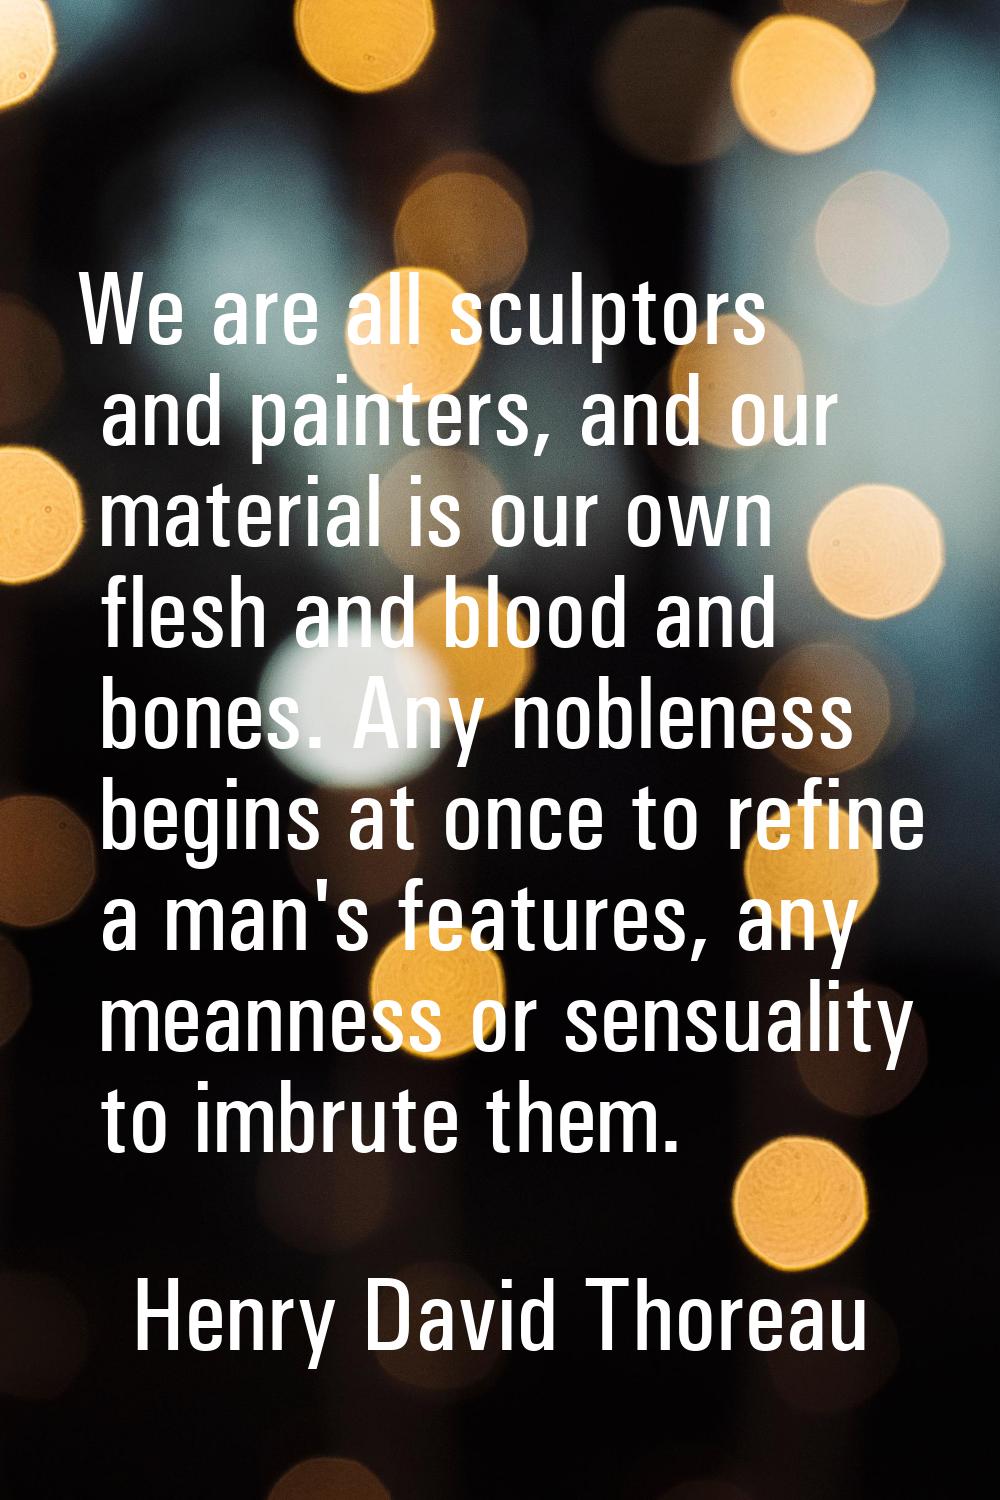 We are all sculptors and painters, and our material is our own flesh and blood and bones. Any noble